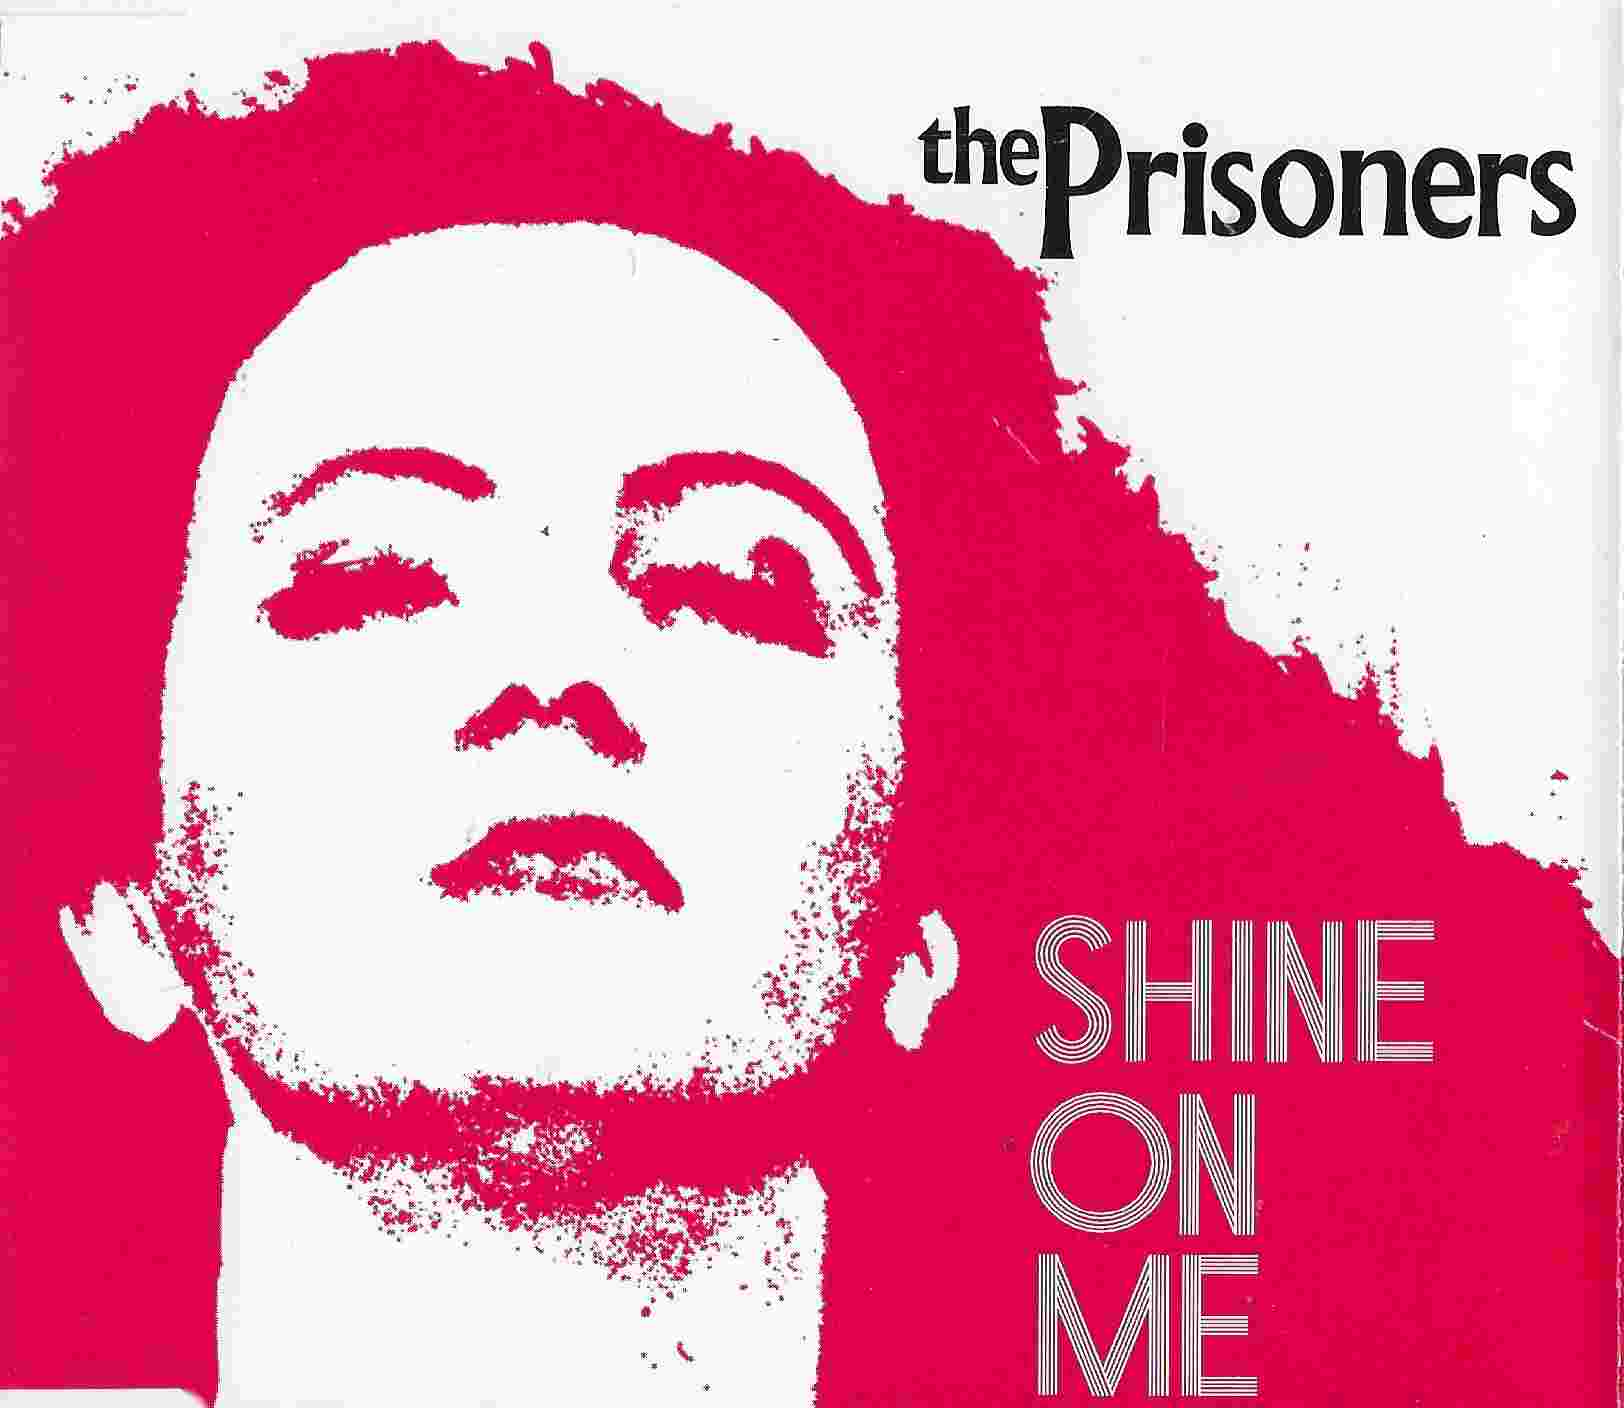 Picture of BLUFF 043 CD Shine on me by artist Day / Taylor / The Prisoners 